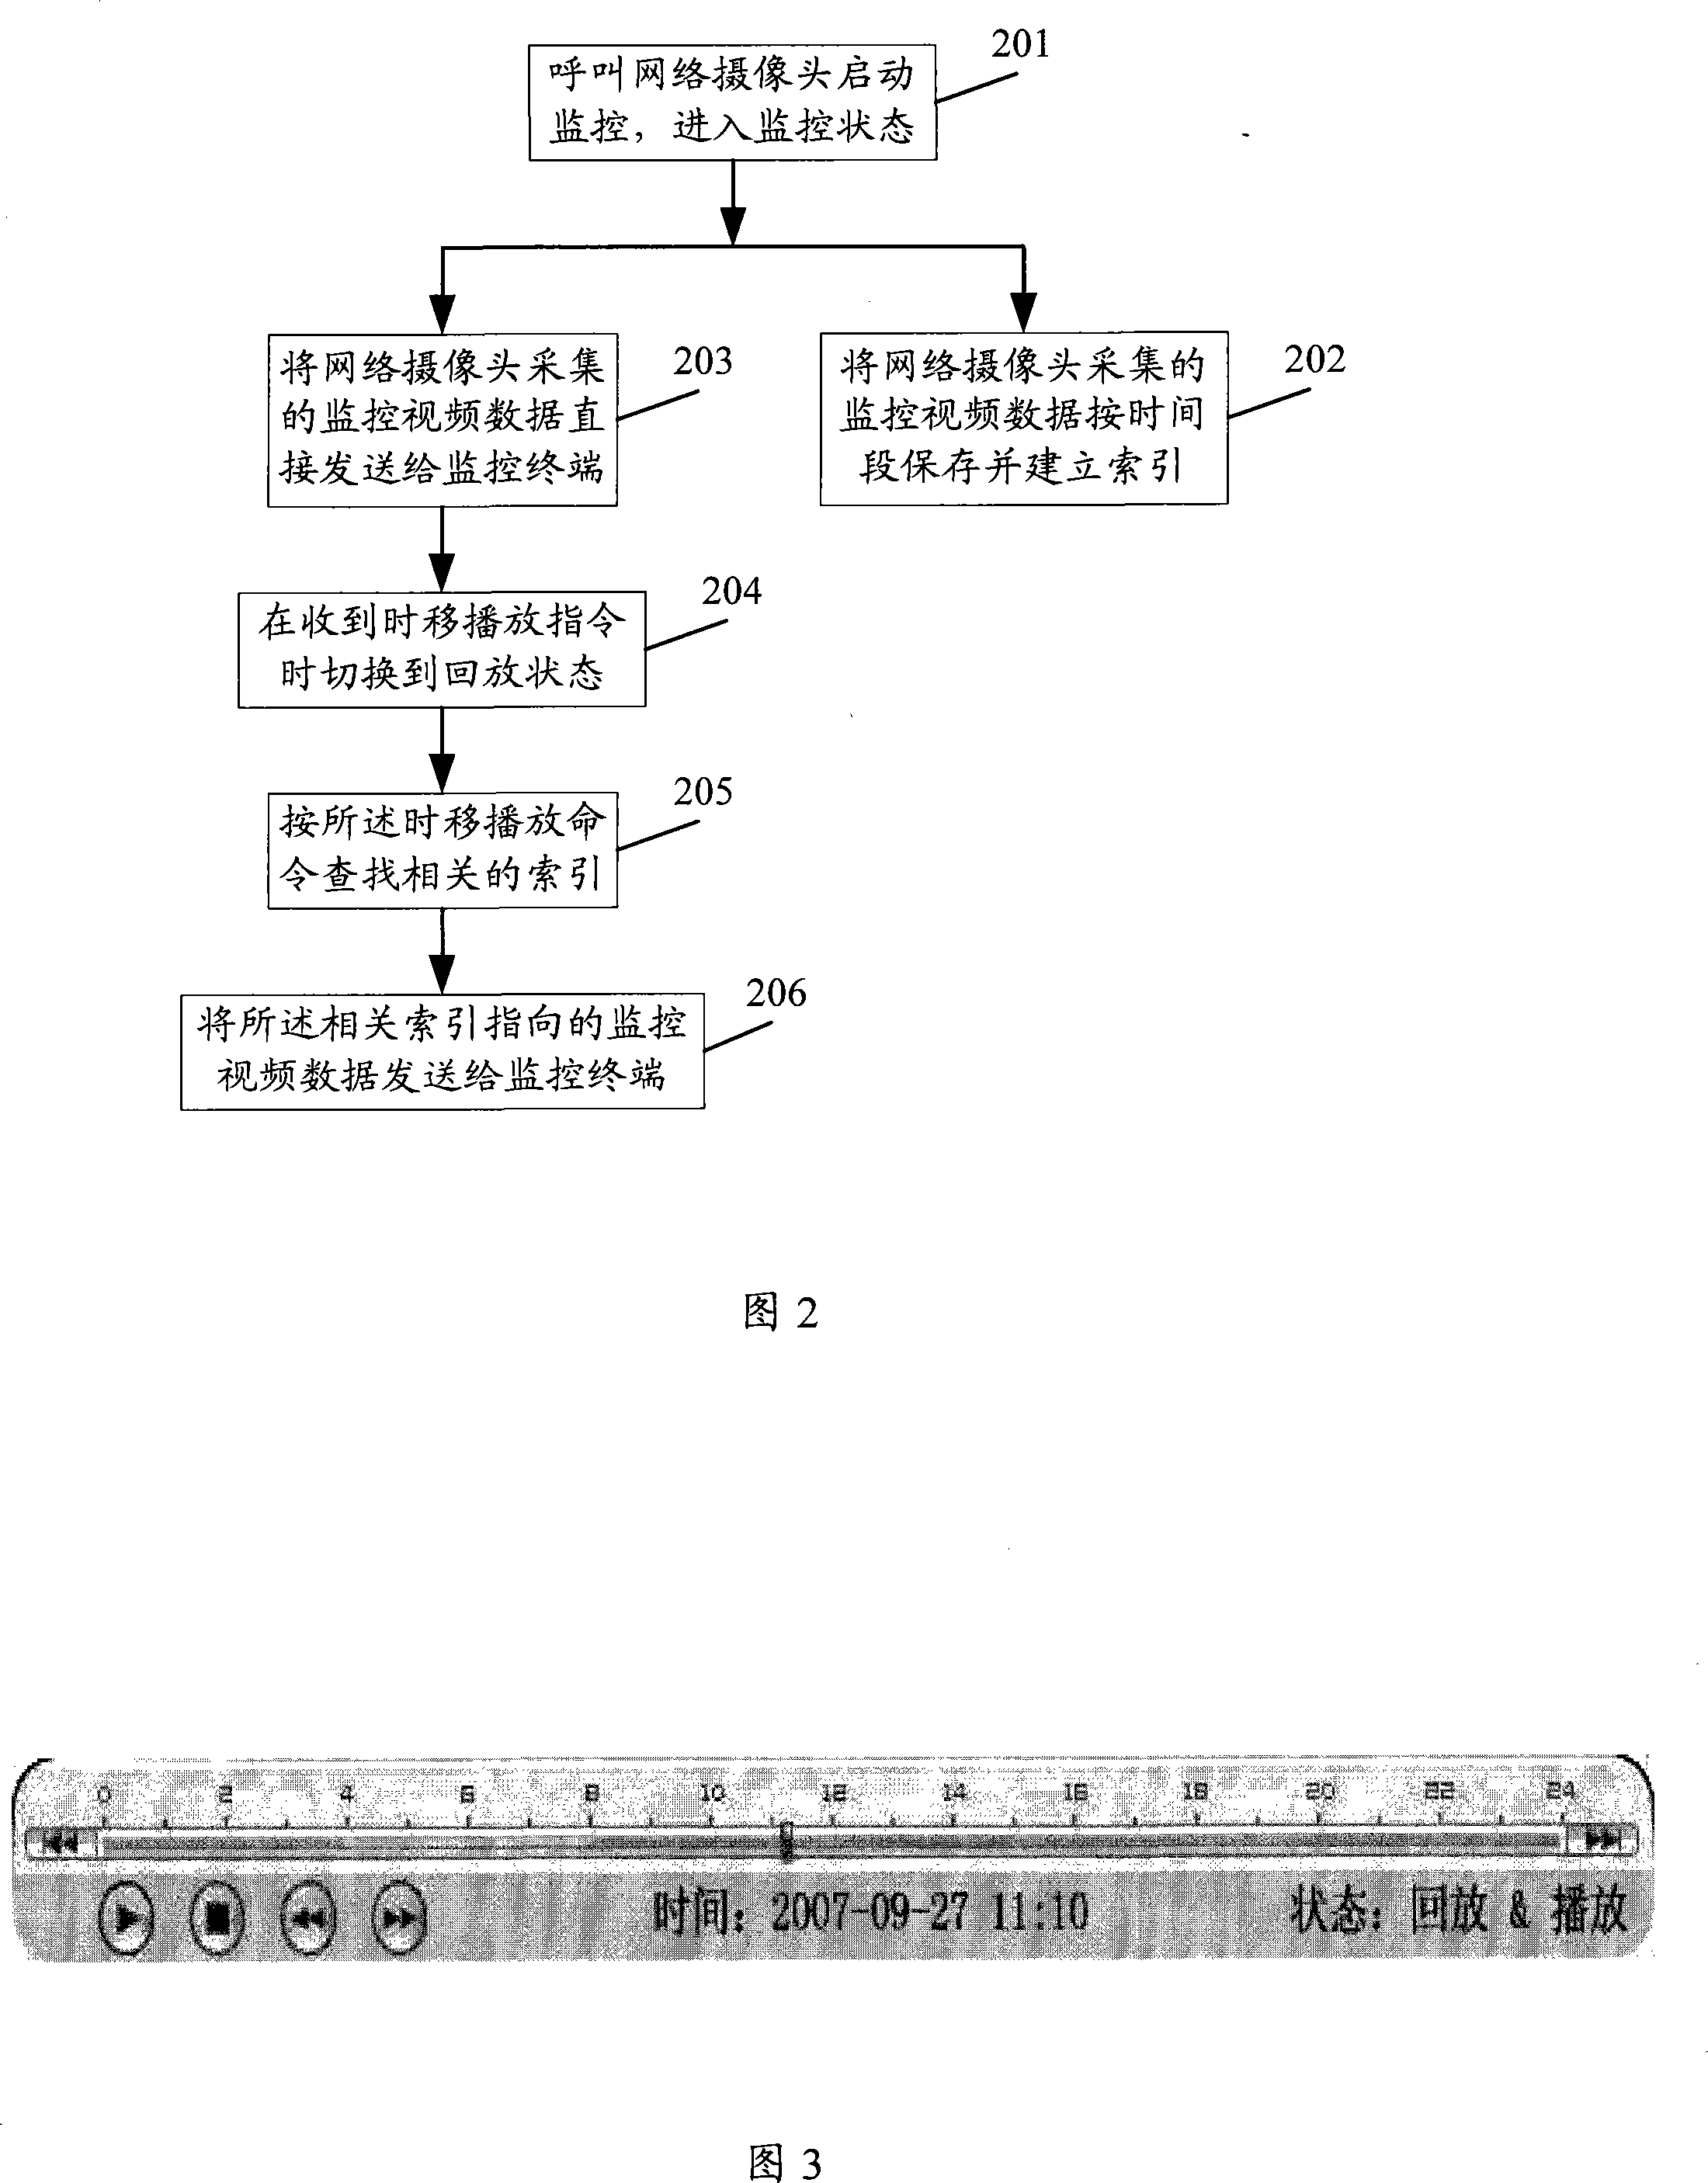 Apparatus and method for implementing time shifting broadcast in network monitoring as well as video server